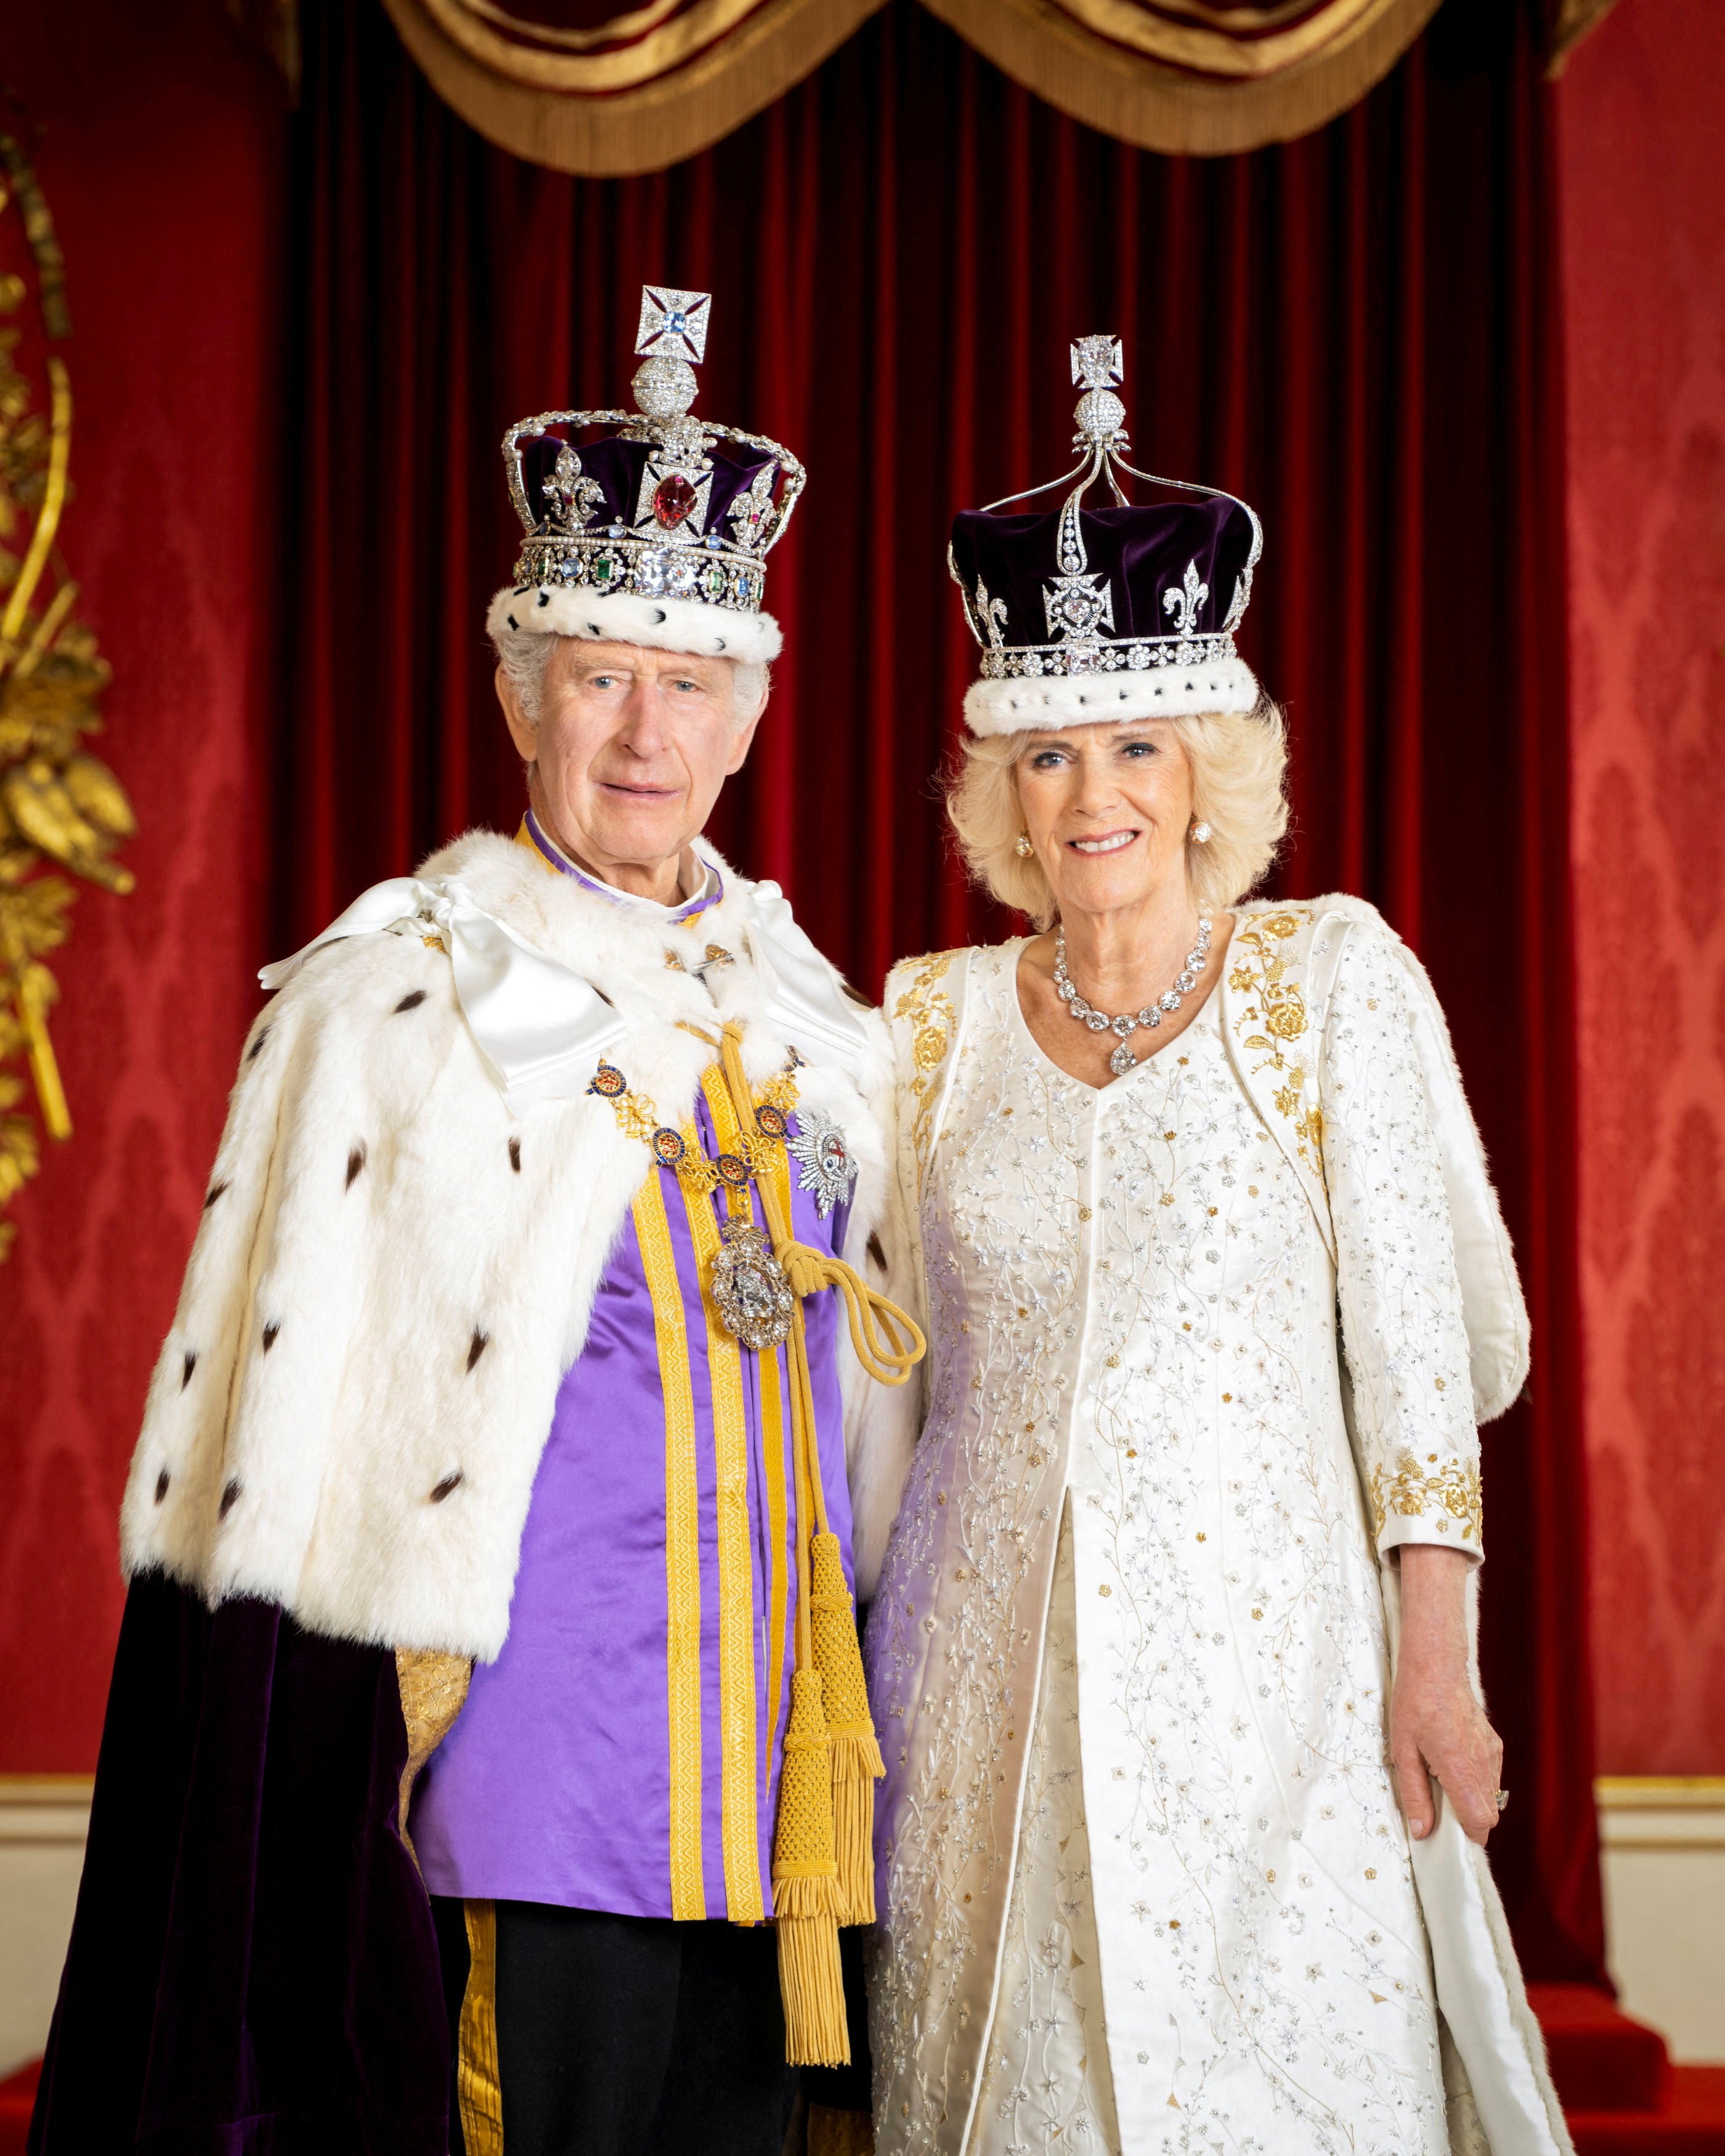 For their coronations, Britain’s King Charles and Queen Camilla are decked out in Britain’s Crown Jewels in the Throne Room at Buckingham Palace, London, UK, on May 8. Photo: Reuters